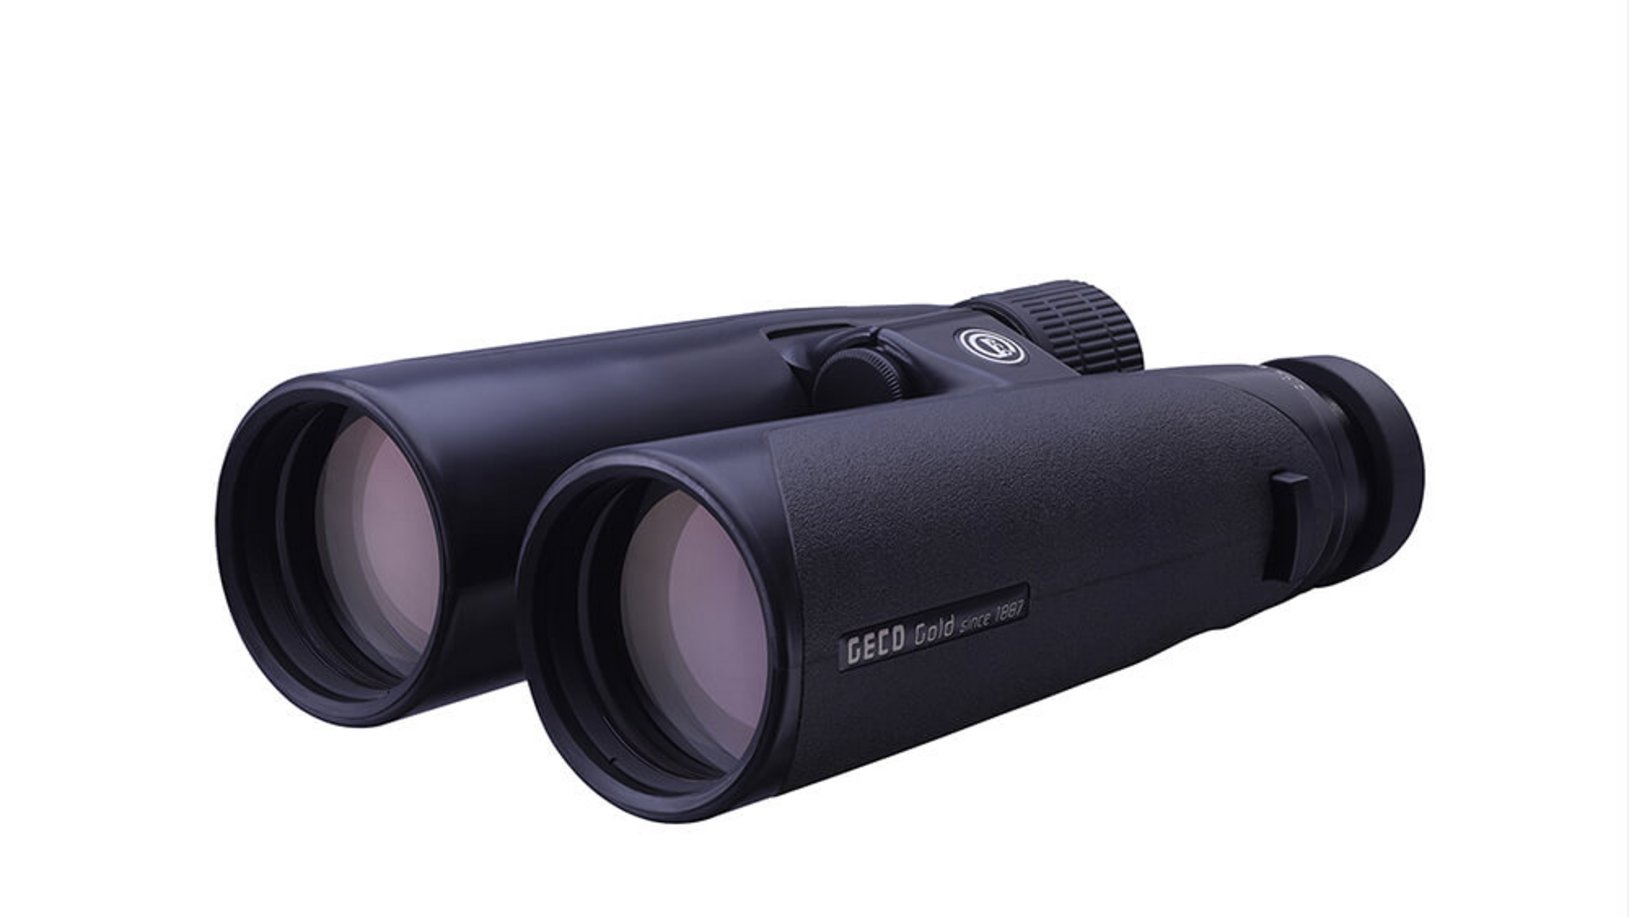 Image of the GECO Binocular Gold 12,5x50 Black in lying position